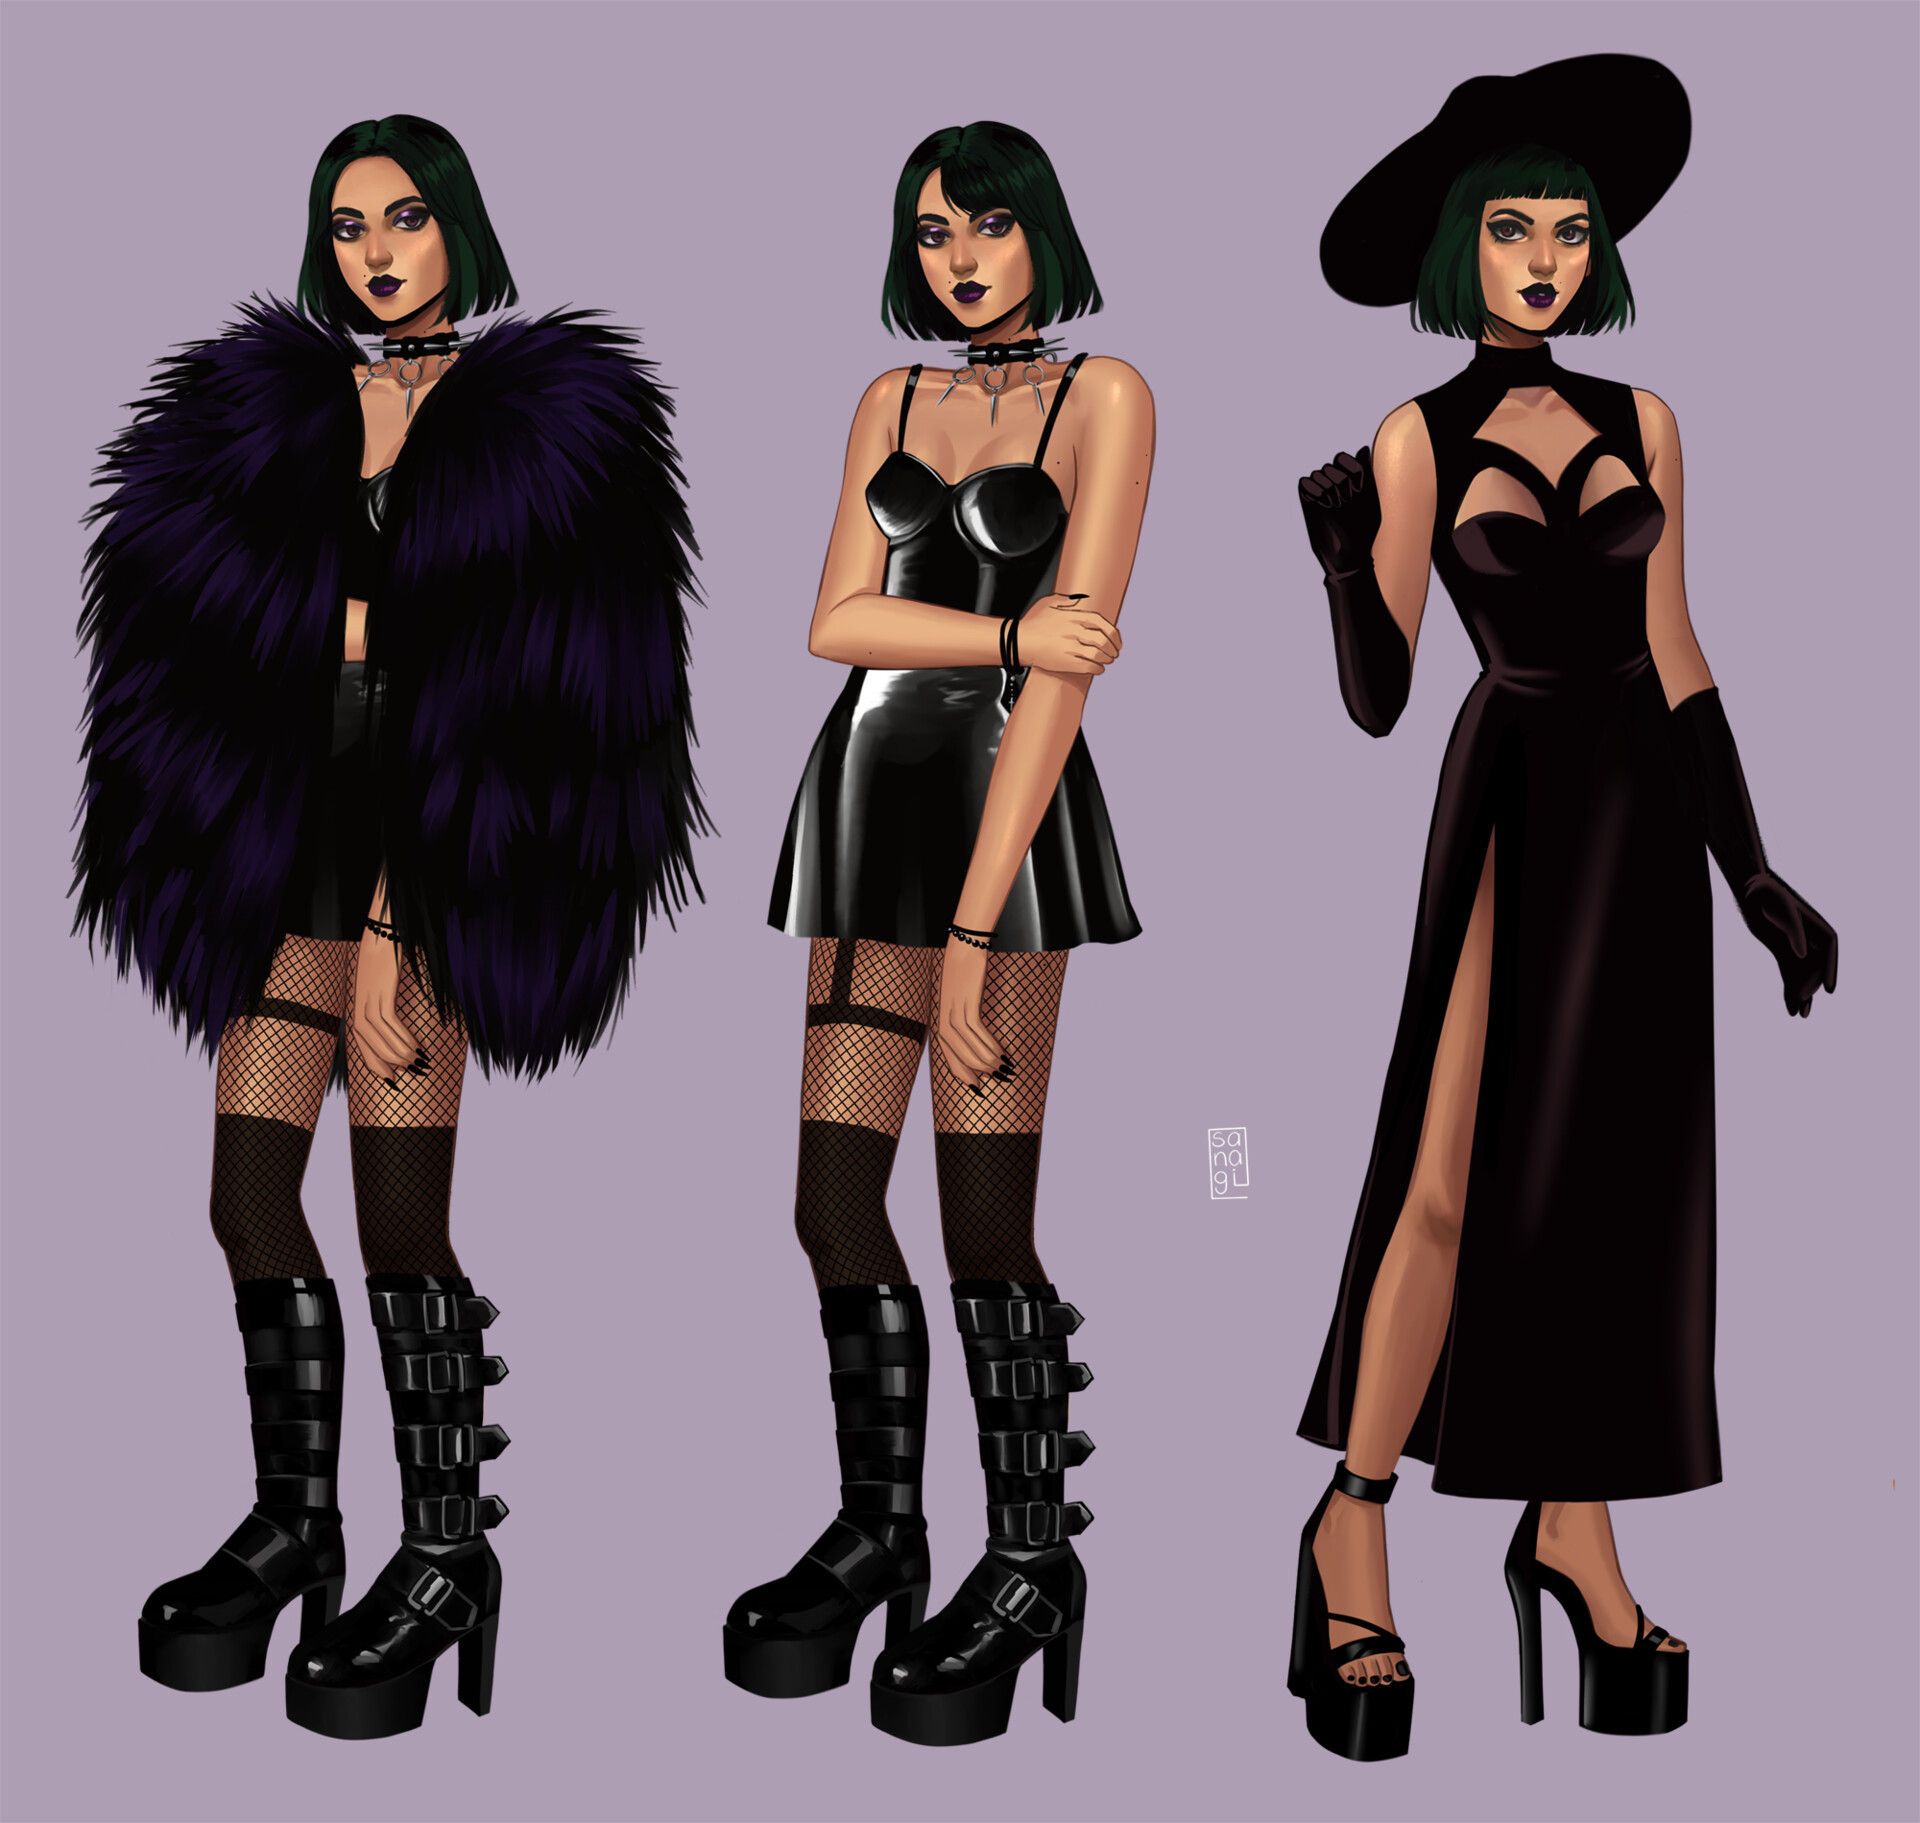 gothicstyle #gothgirl #gothic #gothicgirl  Alternative outfits, Gothic  outfits, Edgy outfits